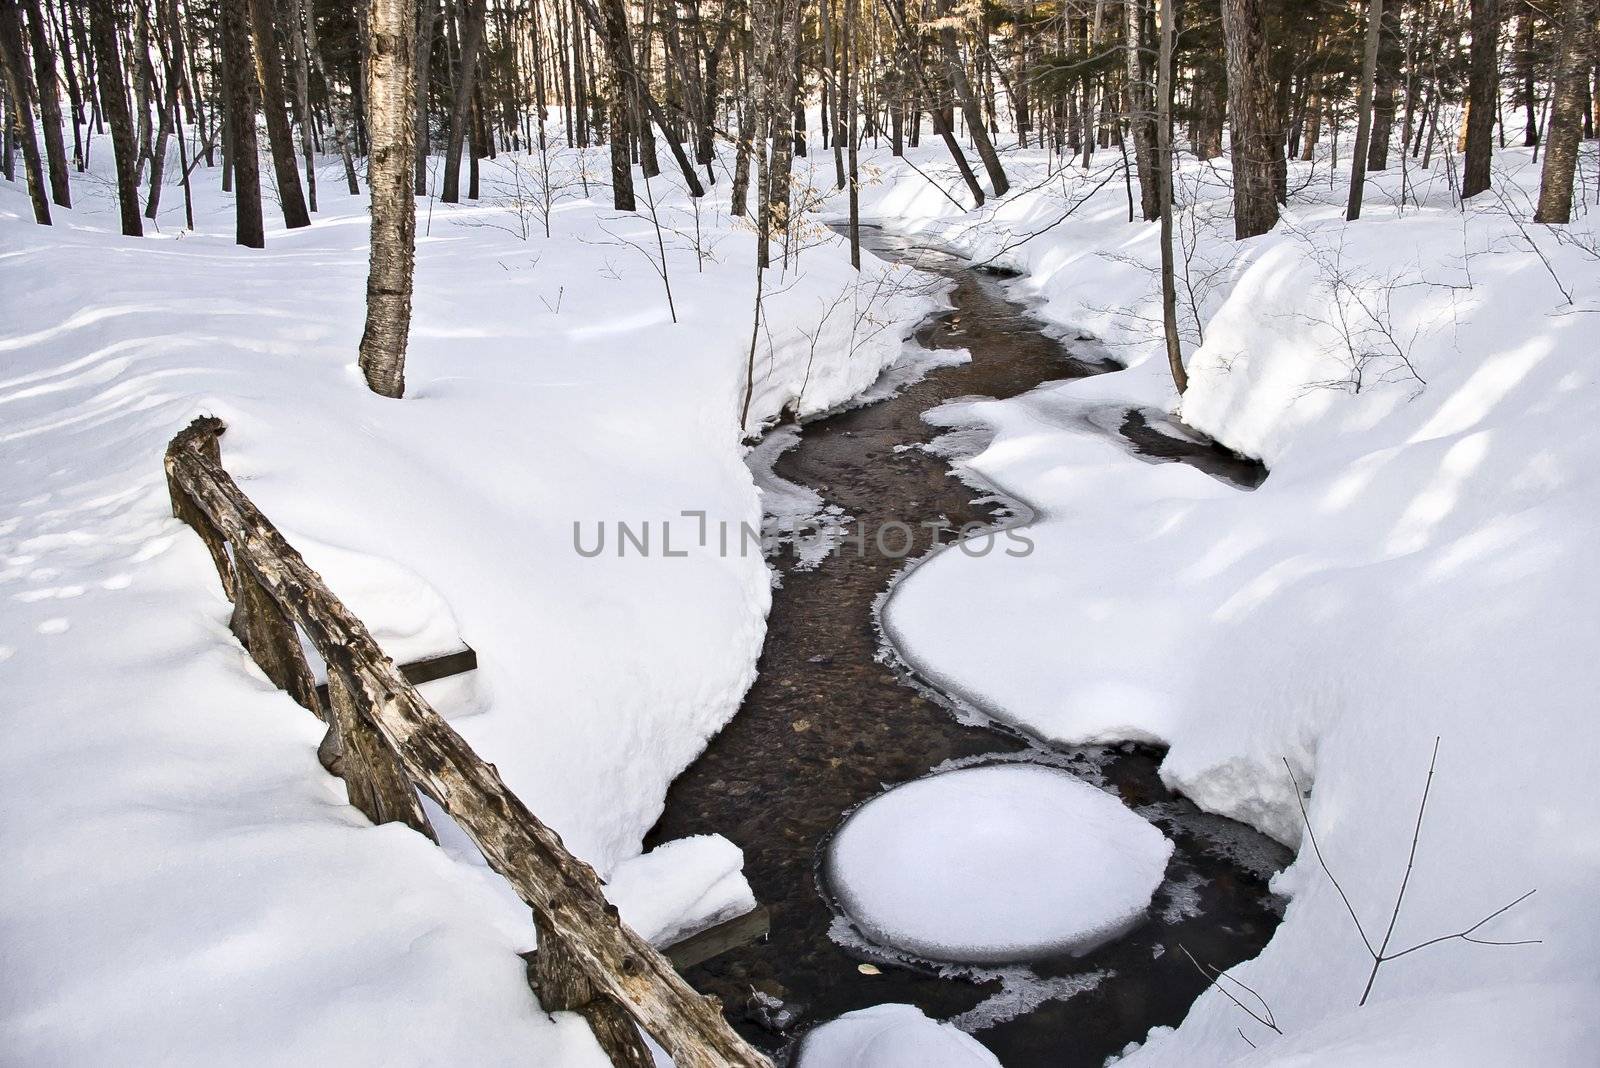 A morning winter stream in the forest covered in snow.